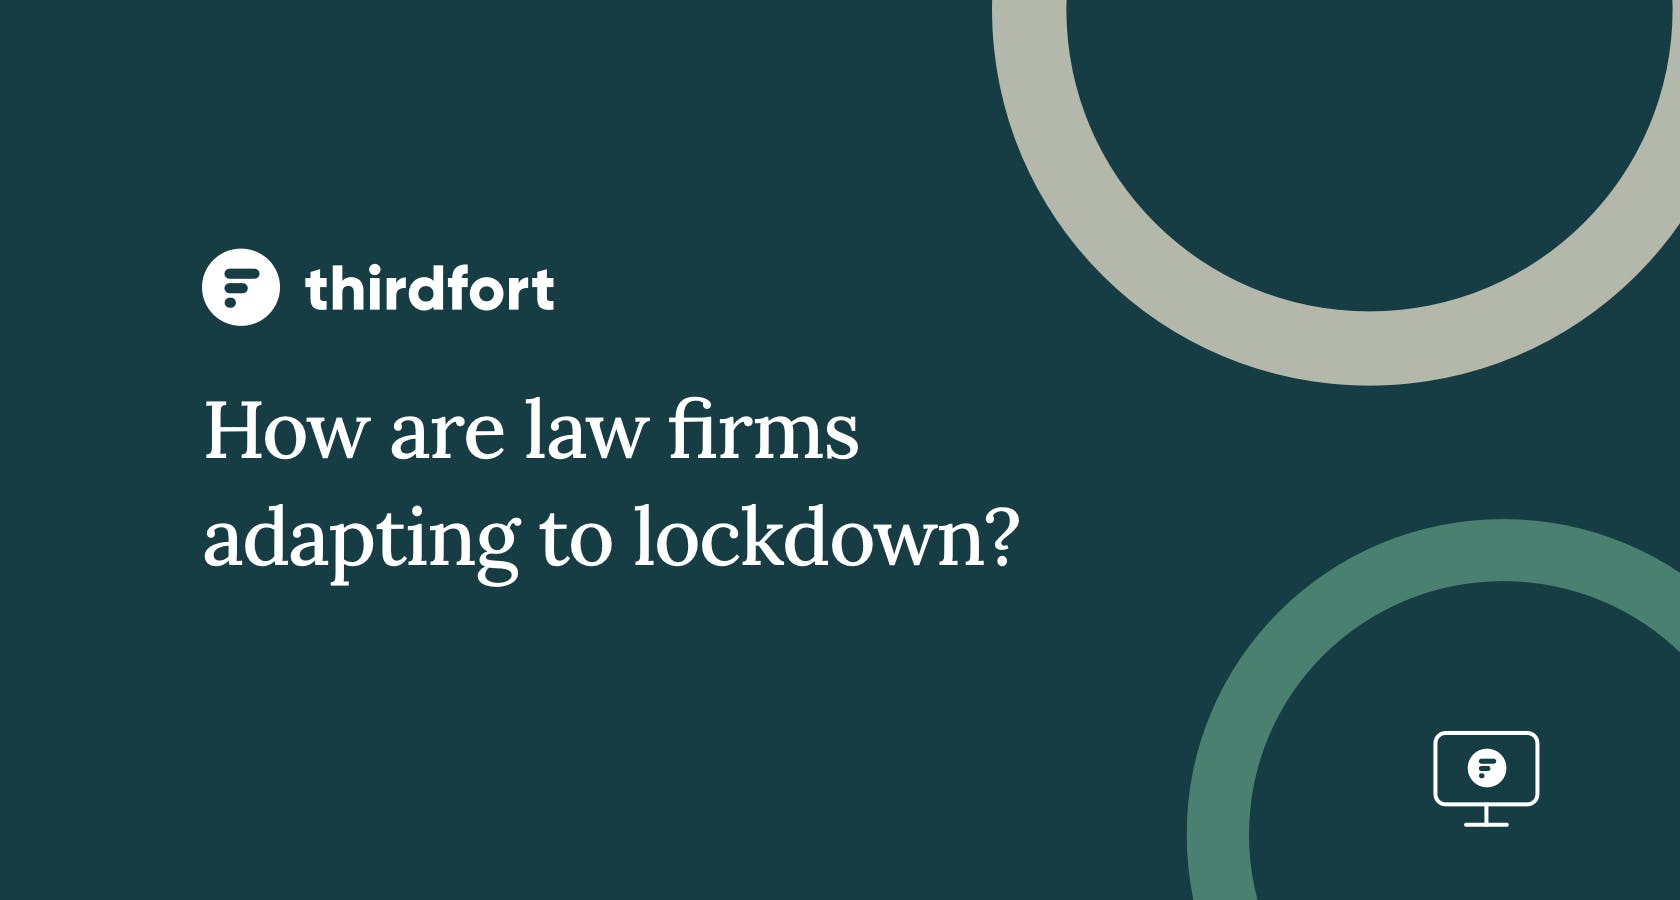 How are law firms adapting to lockdown? 